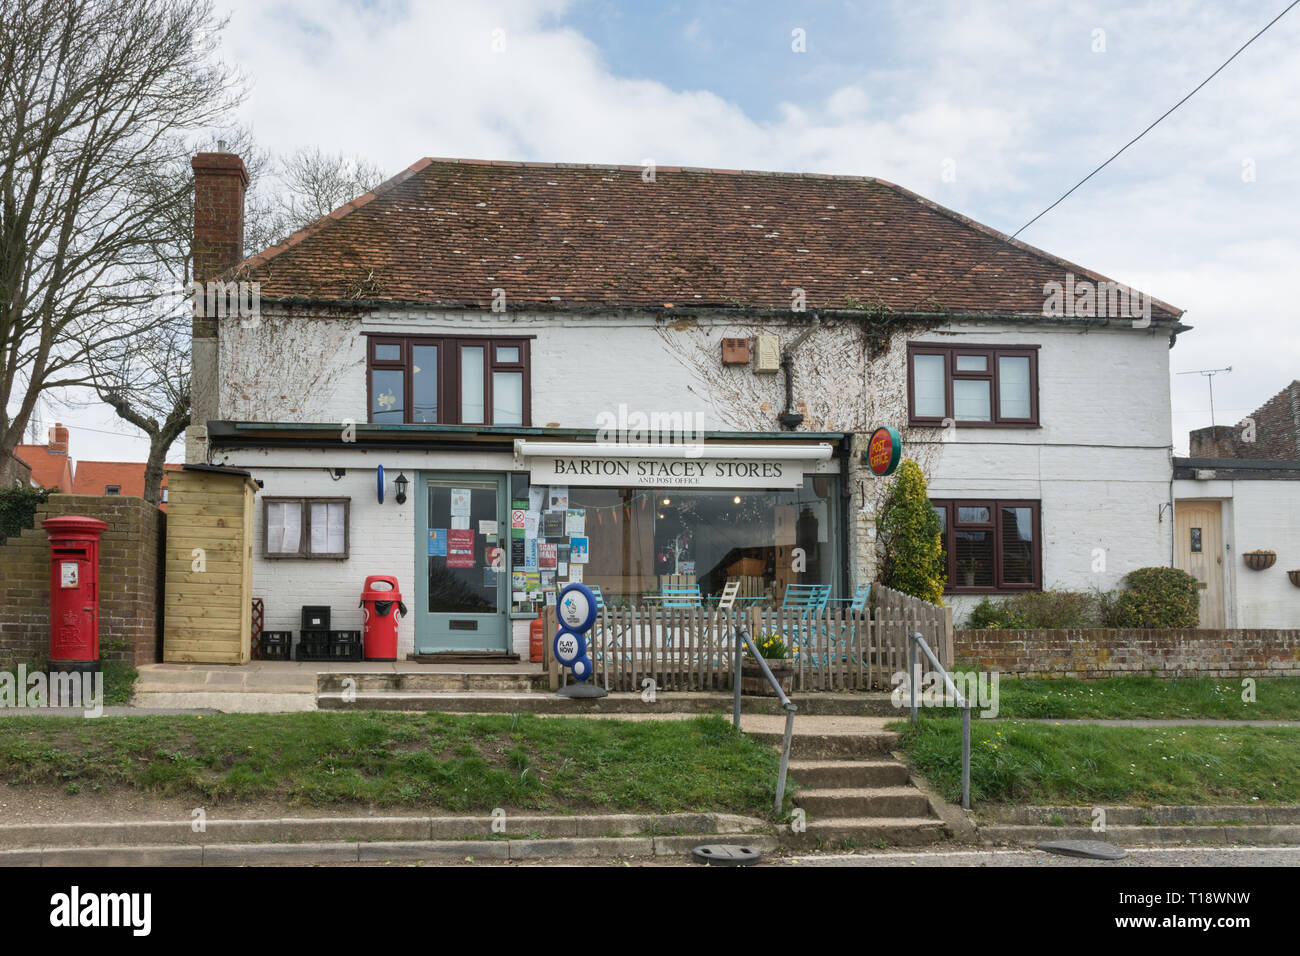 Barton Stacey Stores, village shop, and post office in Hampshire, UK Stock Photo